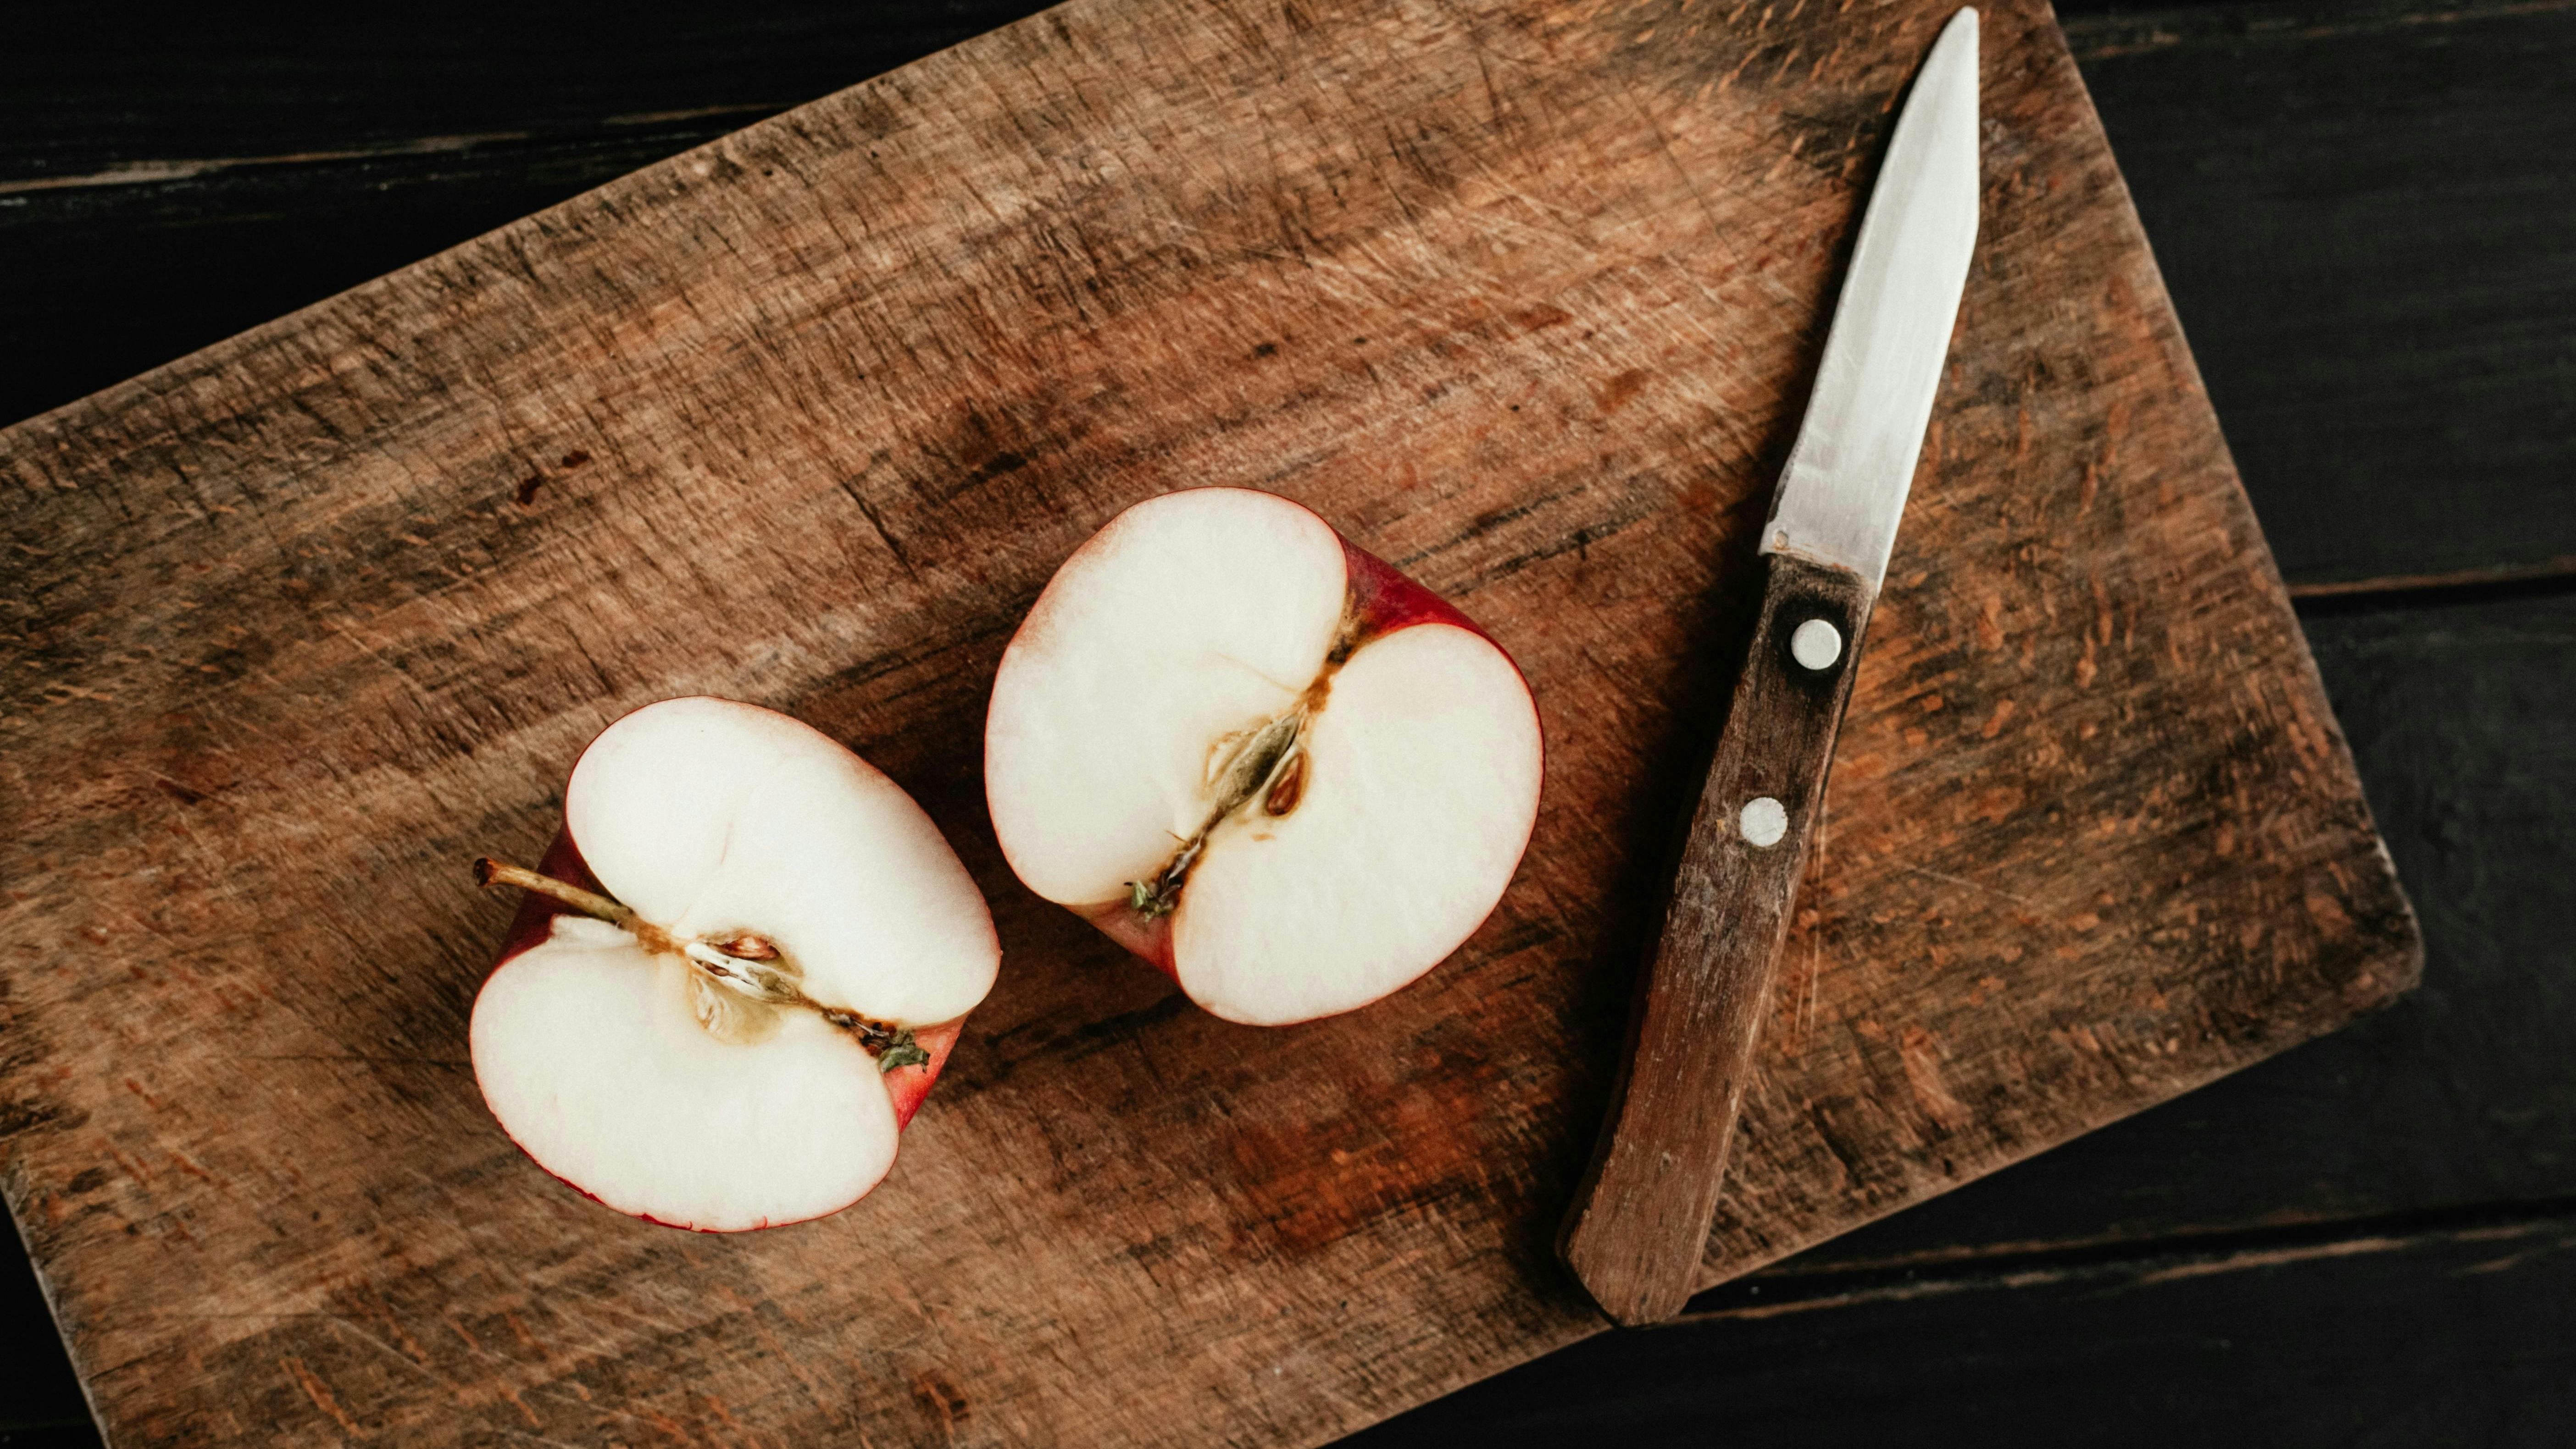 A paring knife and a small apple.